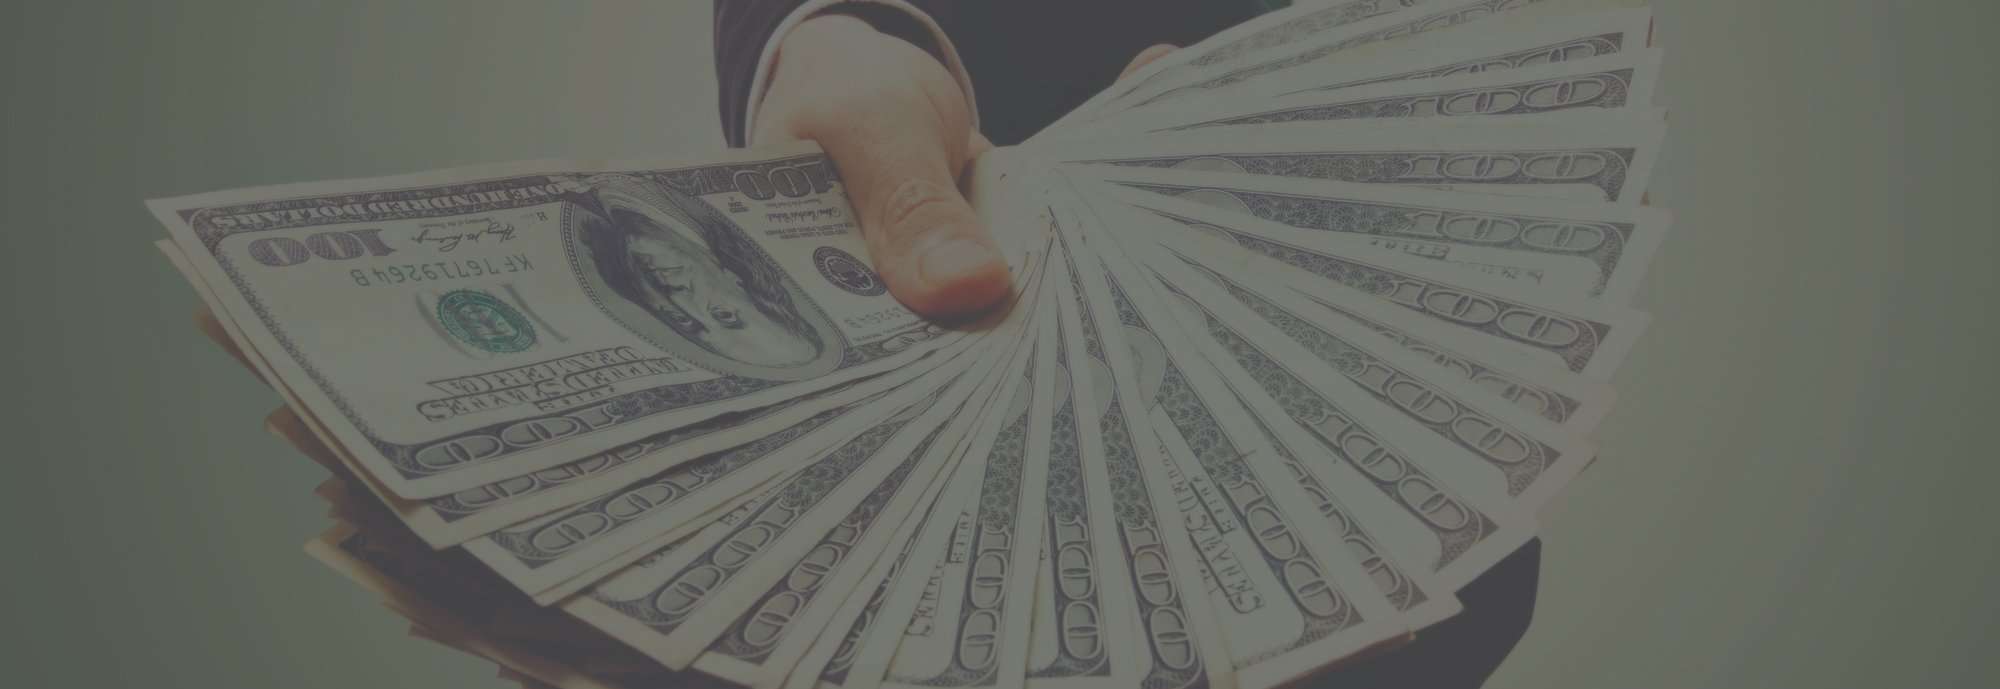 Get Free Money Fast: 18 Sites That Will Get You $2,100 (or ...